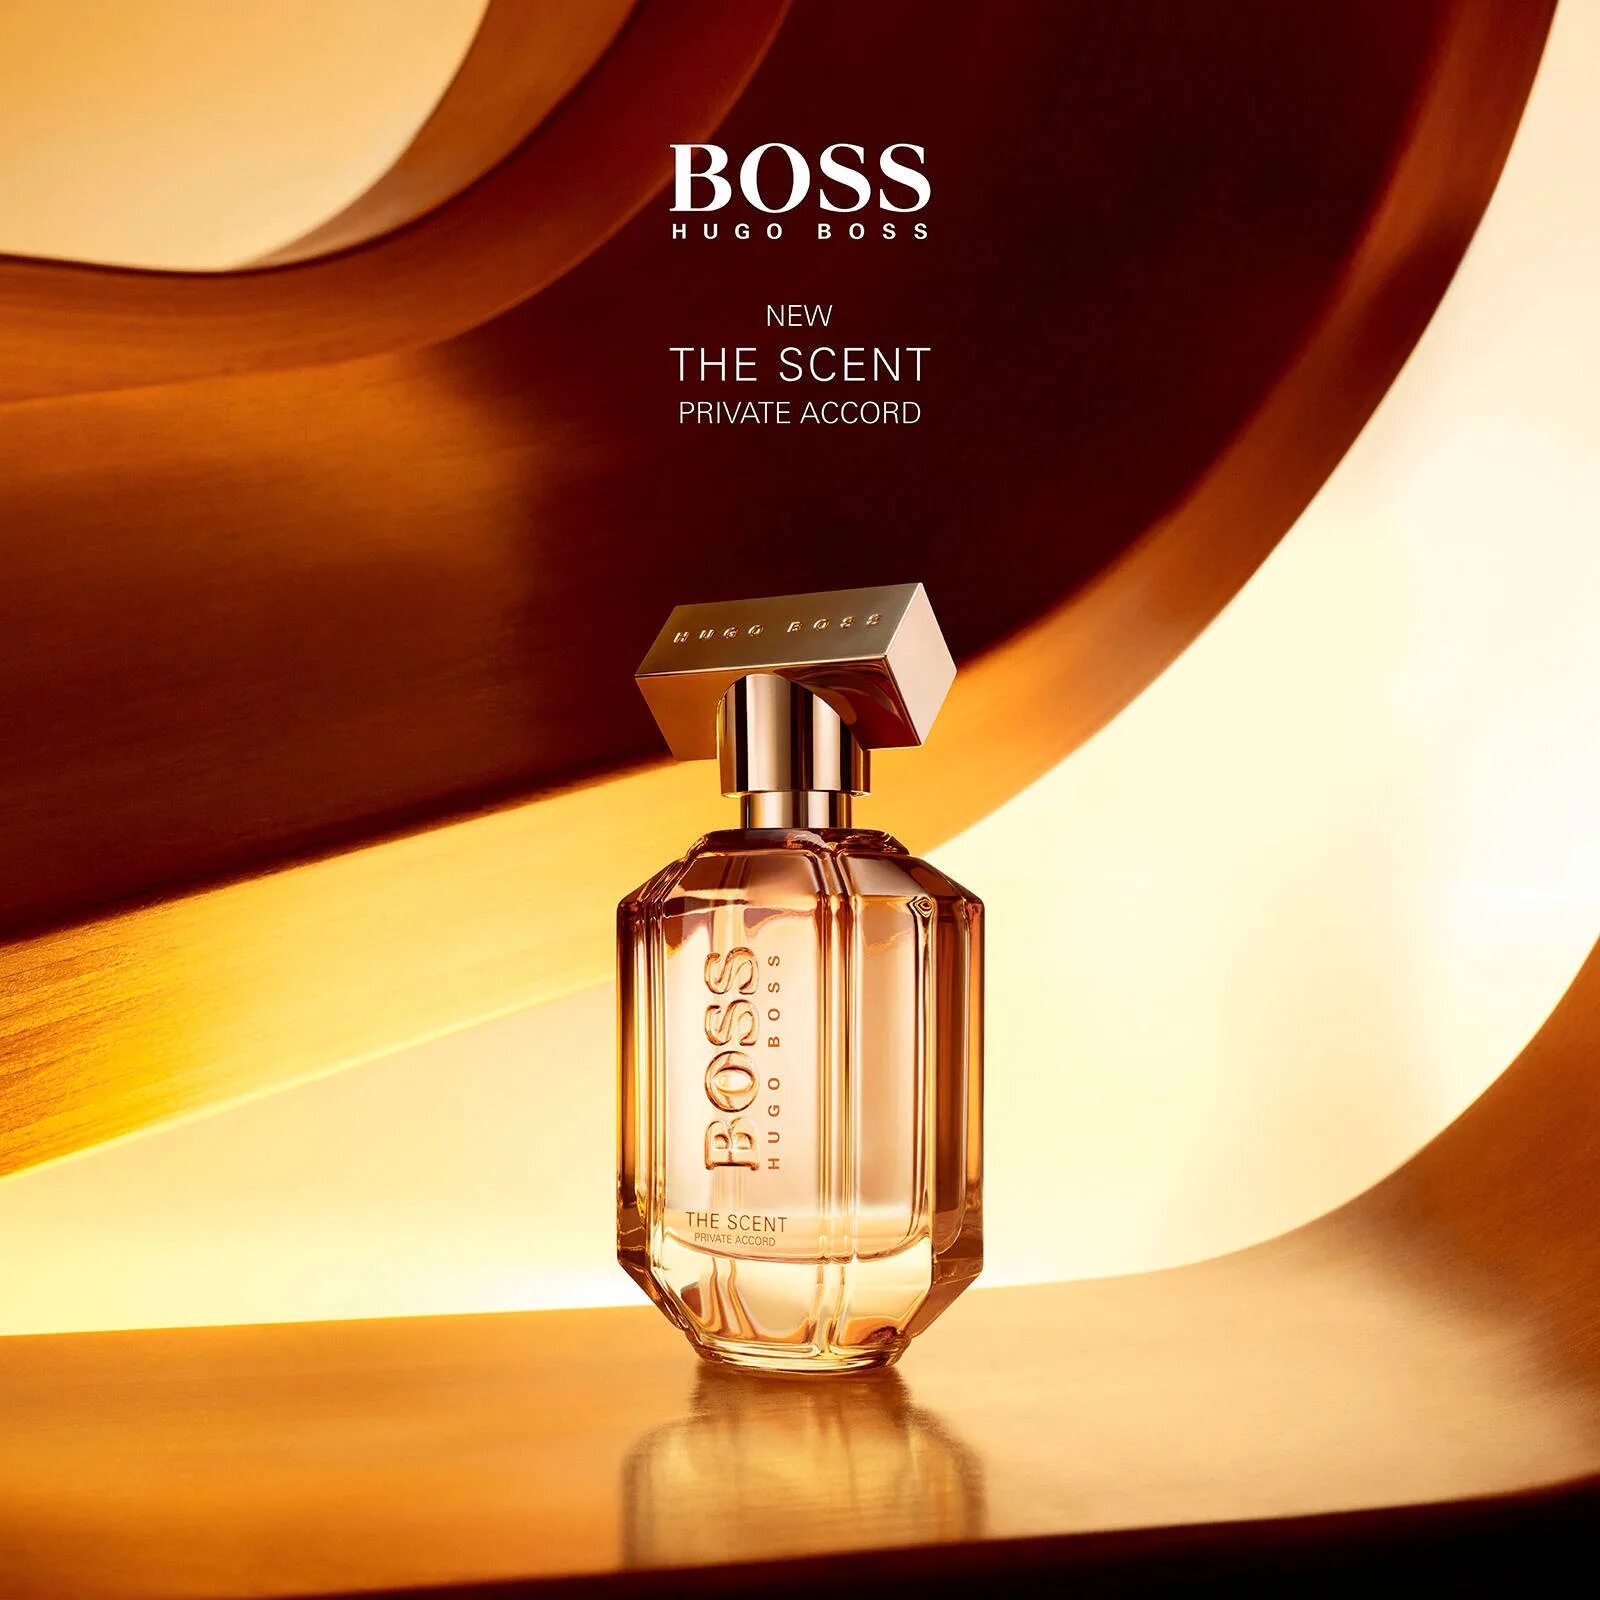 Boss for her парфюмерная вода. Hugo Boss the Scent private Accord for her EDP. Hugo Boss Boss the Scent private Accord. Hugo Boss the Scent private Accord женские. Boss Hugo Boss женские the Scent.